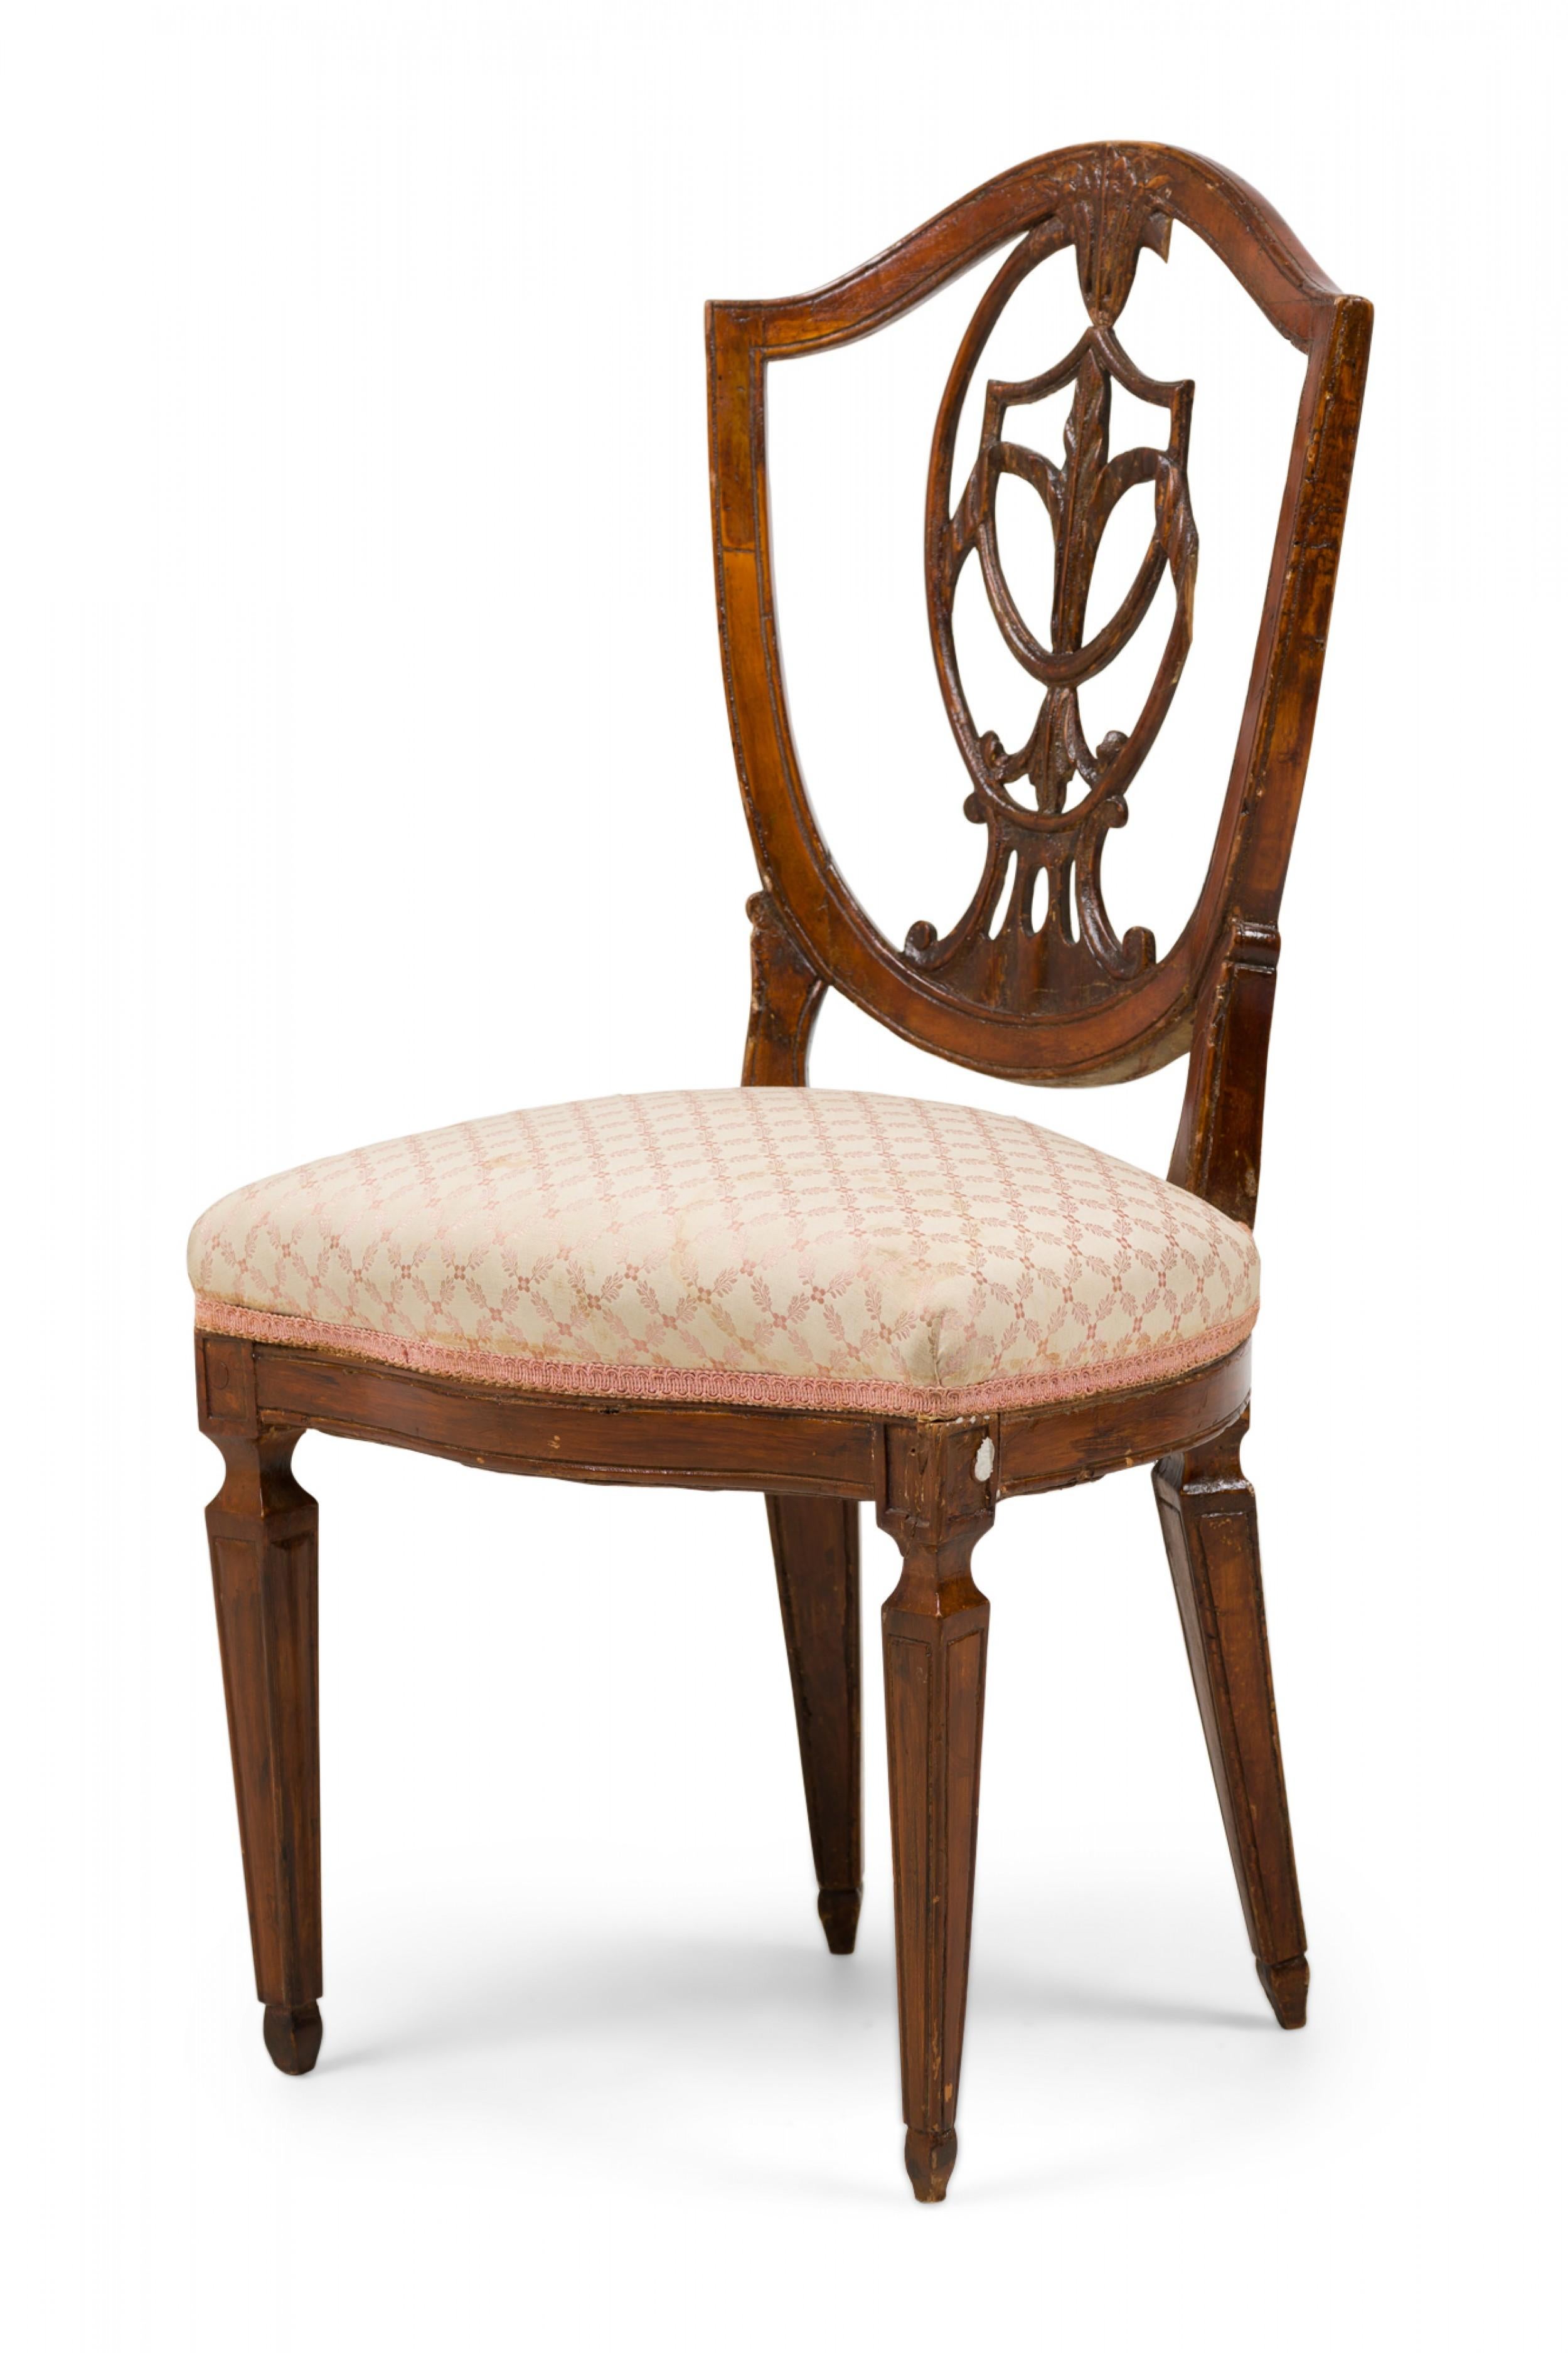 Italian Neo-Classic side chair with an openwork shield form back, carved decorative splat, padded seat upholstered in floral patterned beige fabric with embroidered trim, and 4 shaped legs with incised highlights tapering down to spade feet.